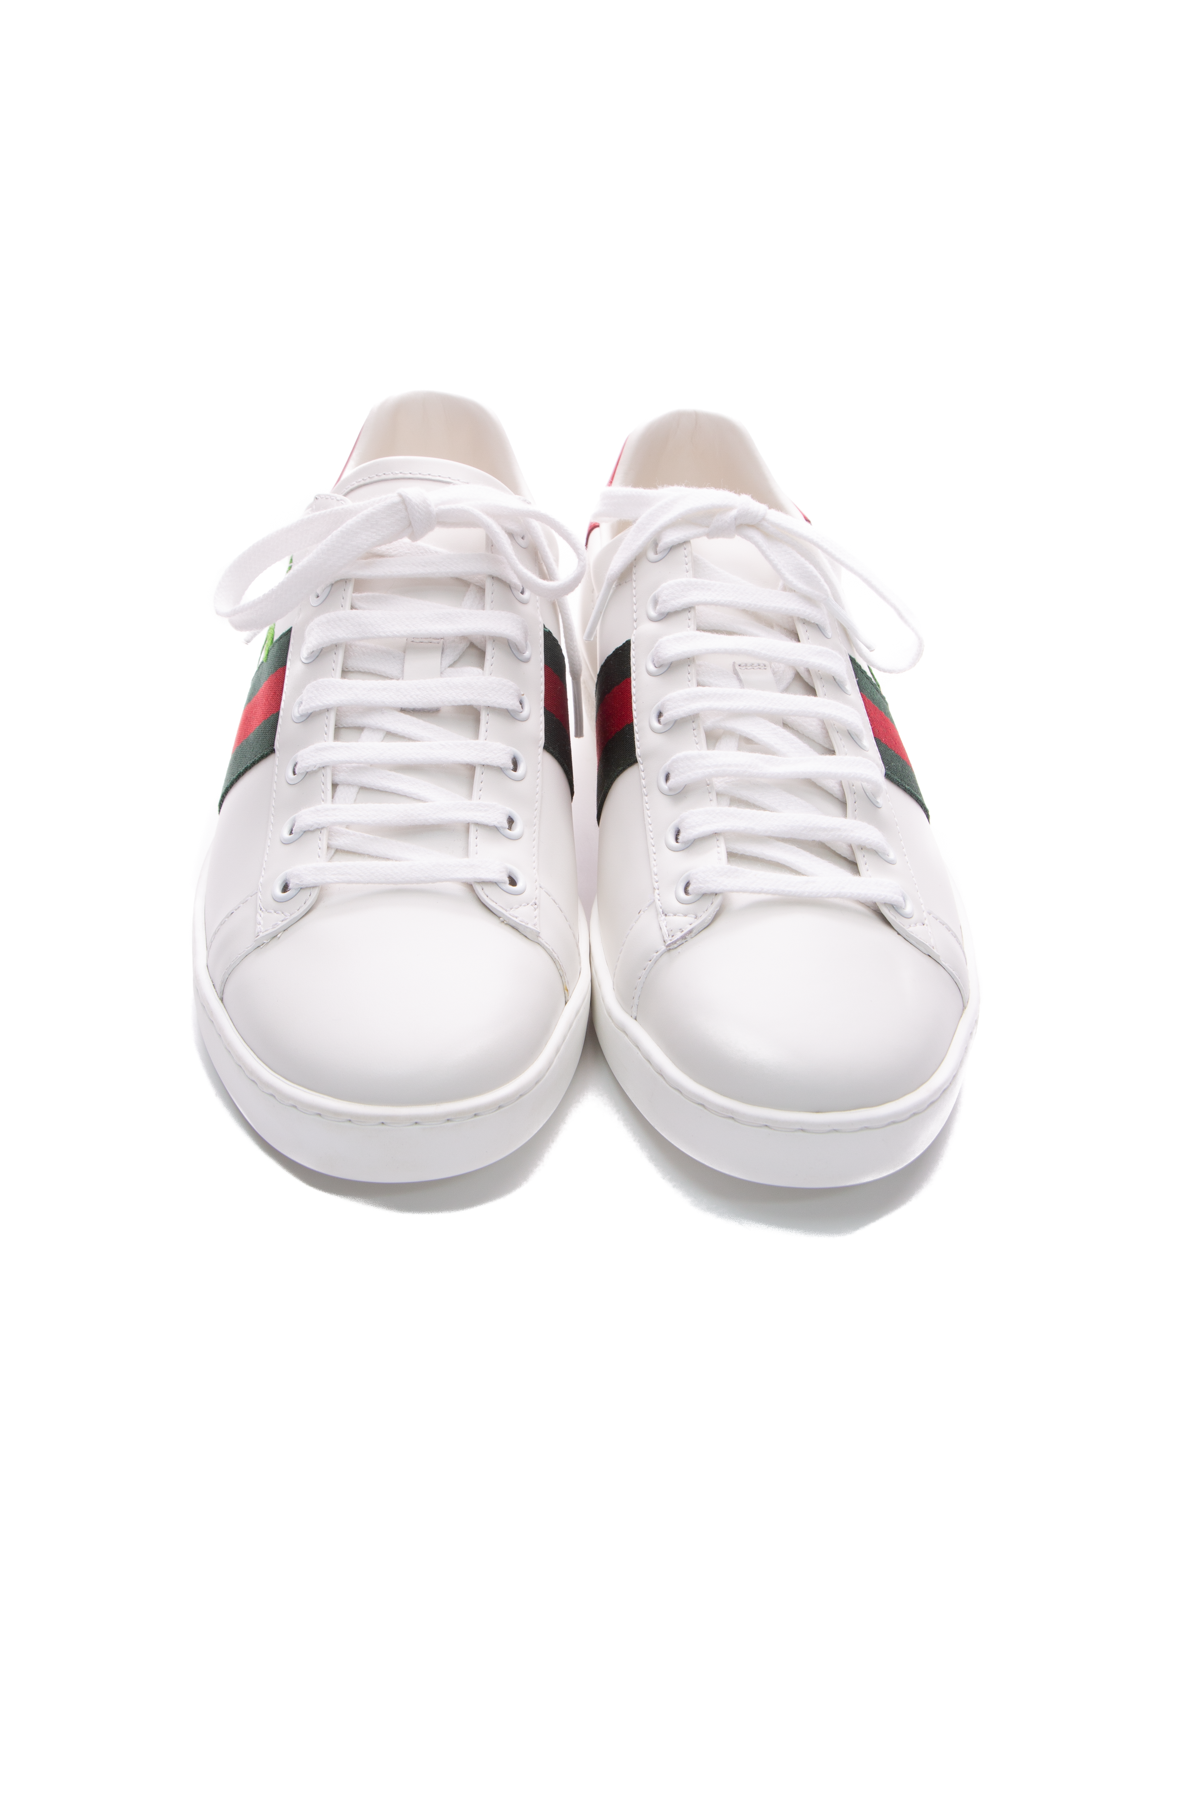 Gucci Embroidered Ace Sneakers - Size 42